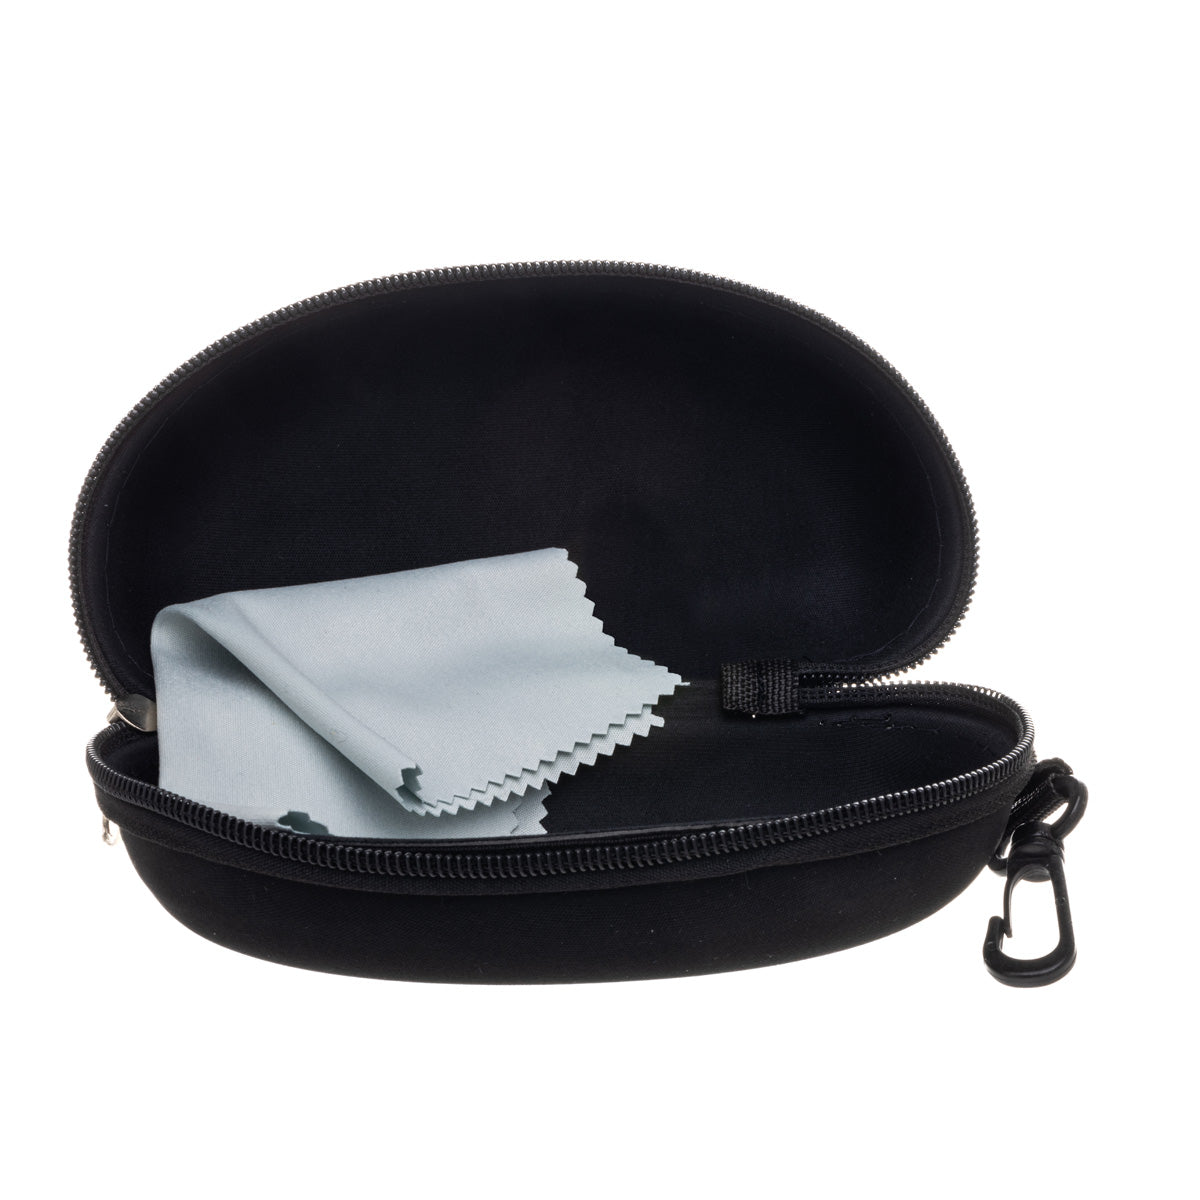 Sunglasses case (Large) + cleaning cloth